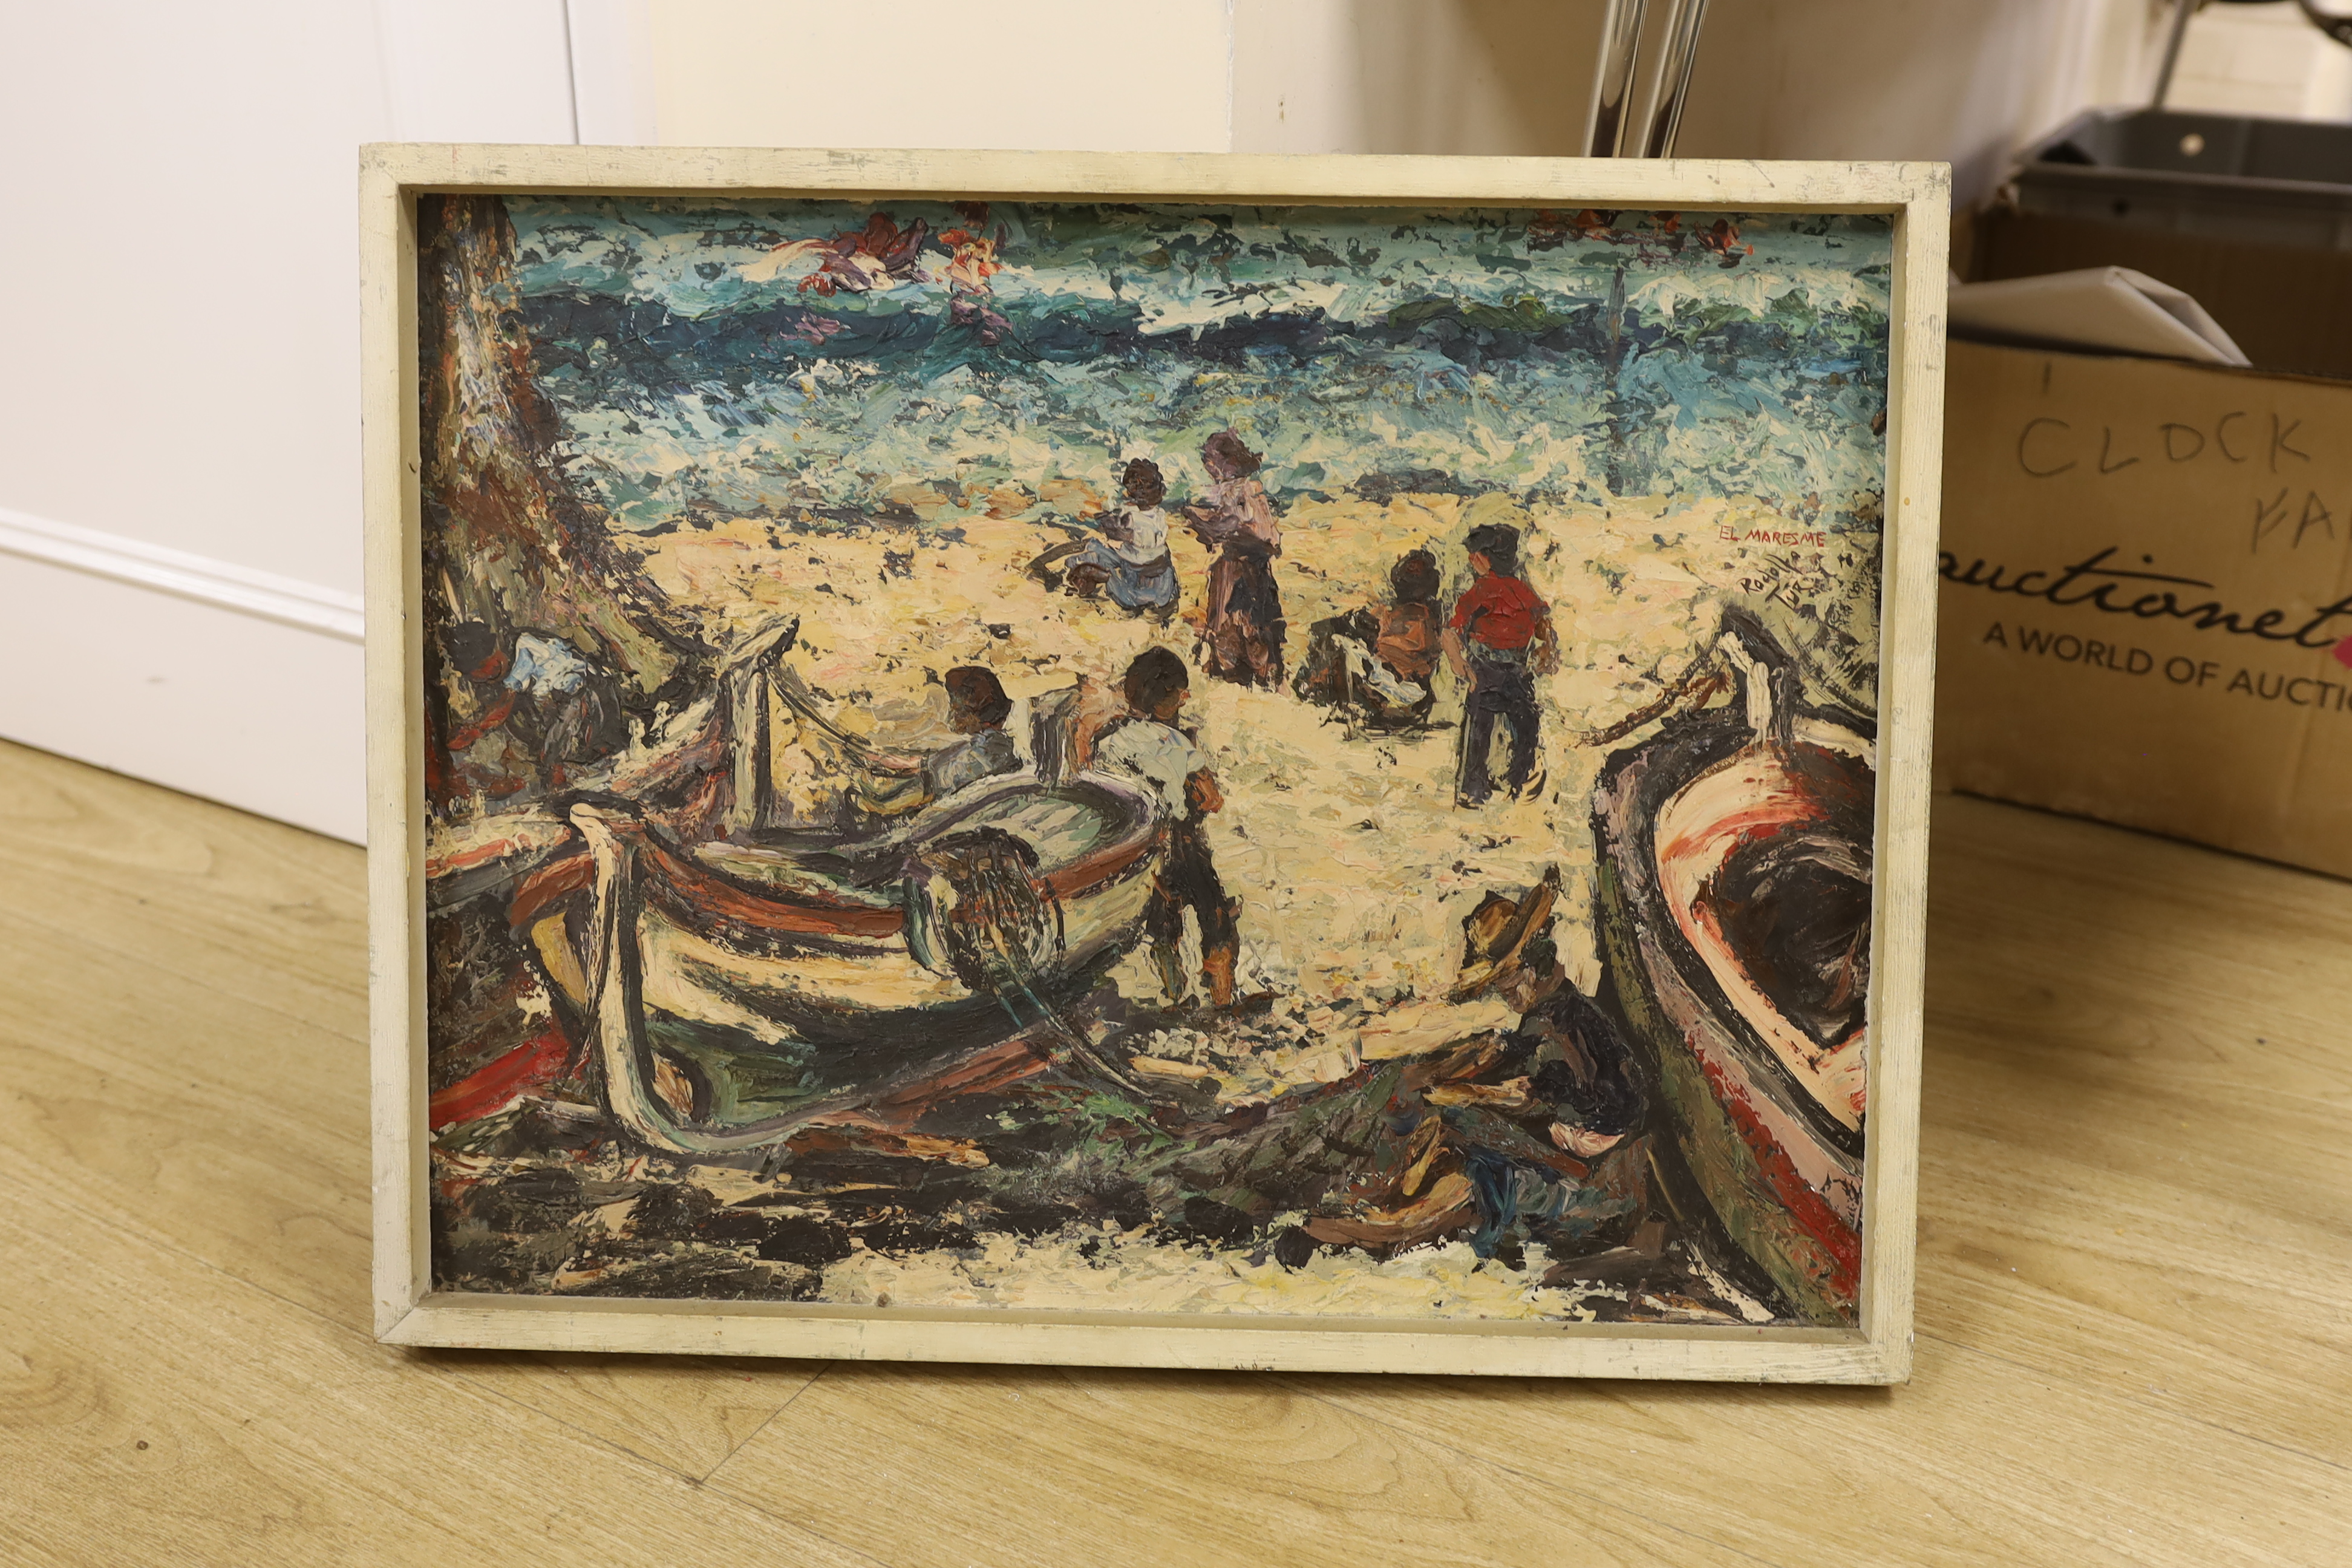 Rudolfo Tur, impasto oil on board, Beached fishing boats and figures, signed and inscribed El Maresme, 48 x 63cm